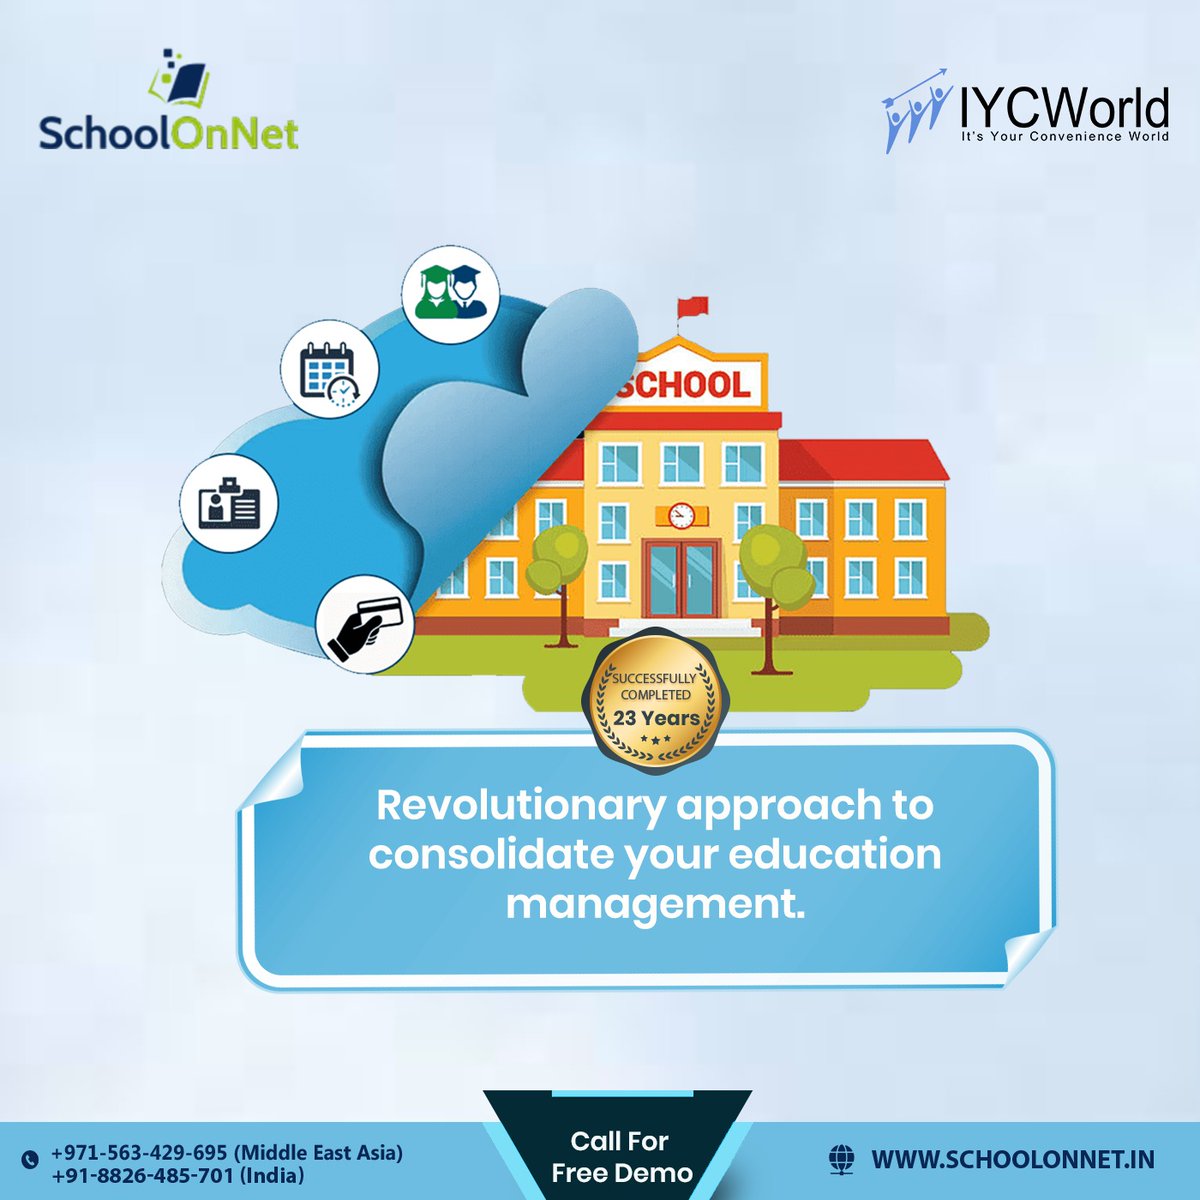 🚀 Revolutionize the Way You Manage Your School with Schoolonnet - Best School Management Software
Contact Us : +91-8826-485-701, +971-563-429-695
or visit us at schoolonnet.in

#erpsoftware  #schoolerp #erpschoolsoftware #smartschool #schoolmanagementsystem